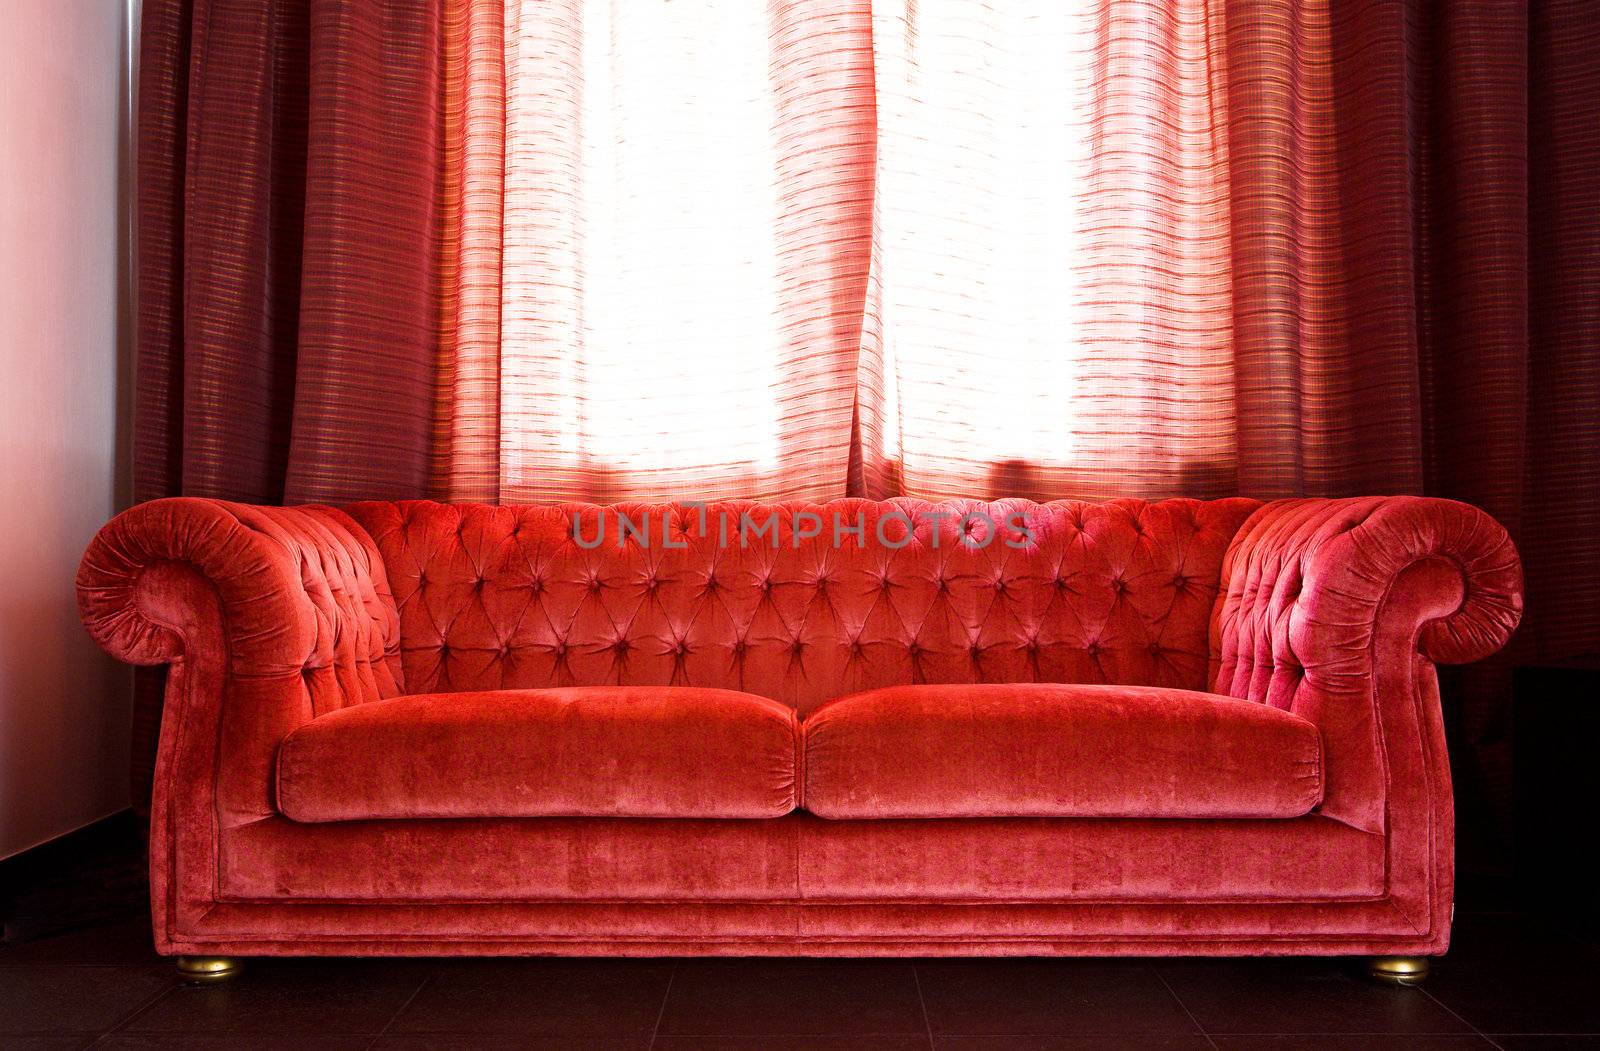 Drawing room with a red sofa by Gravicapa